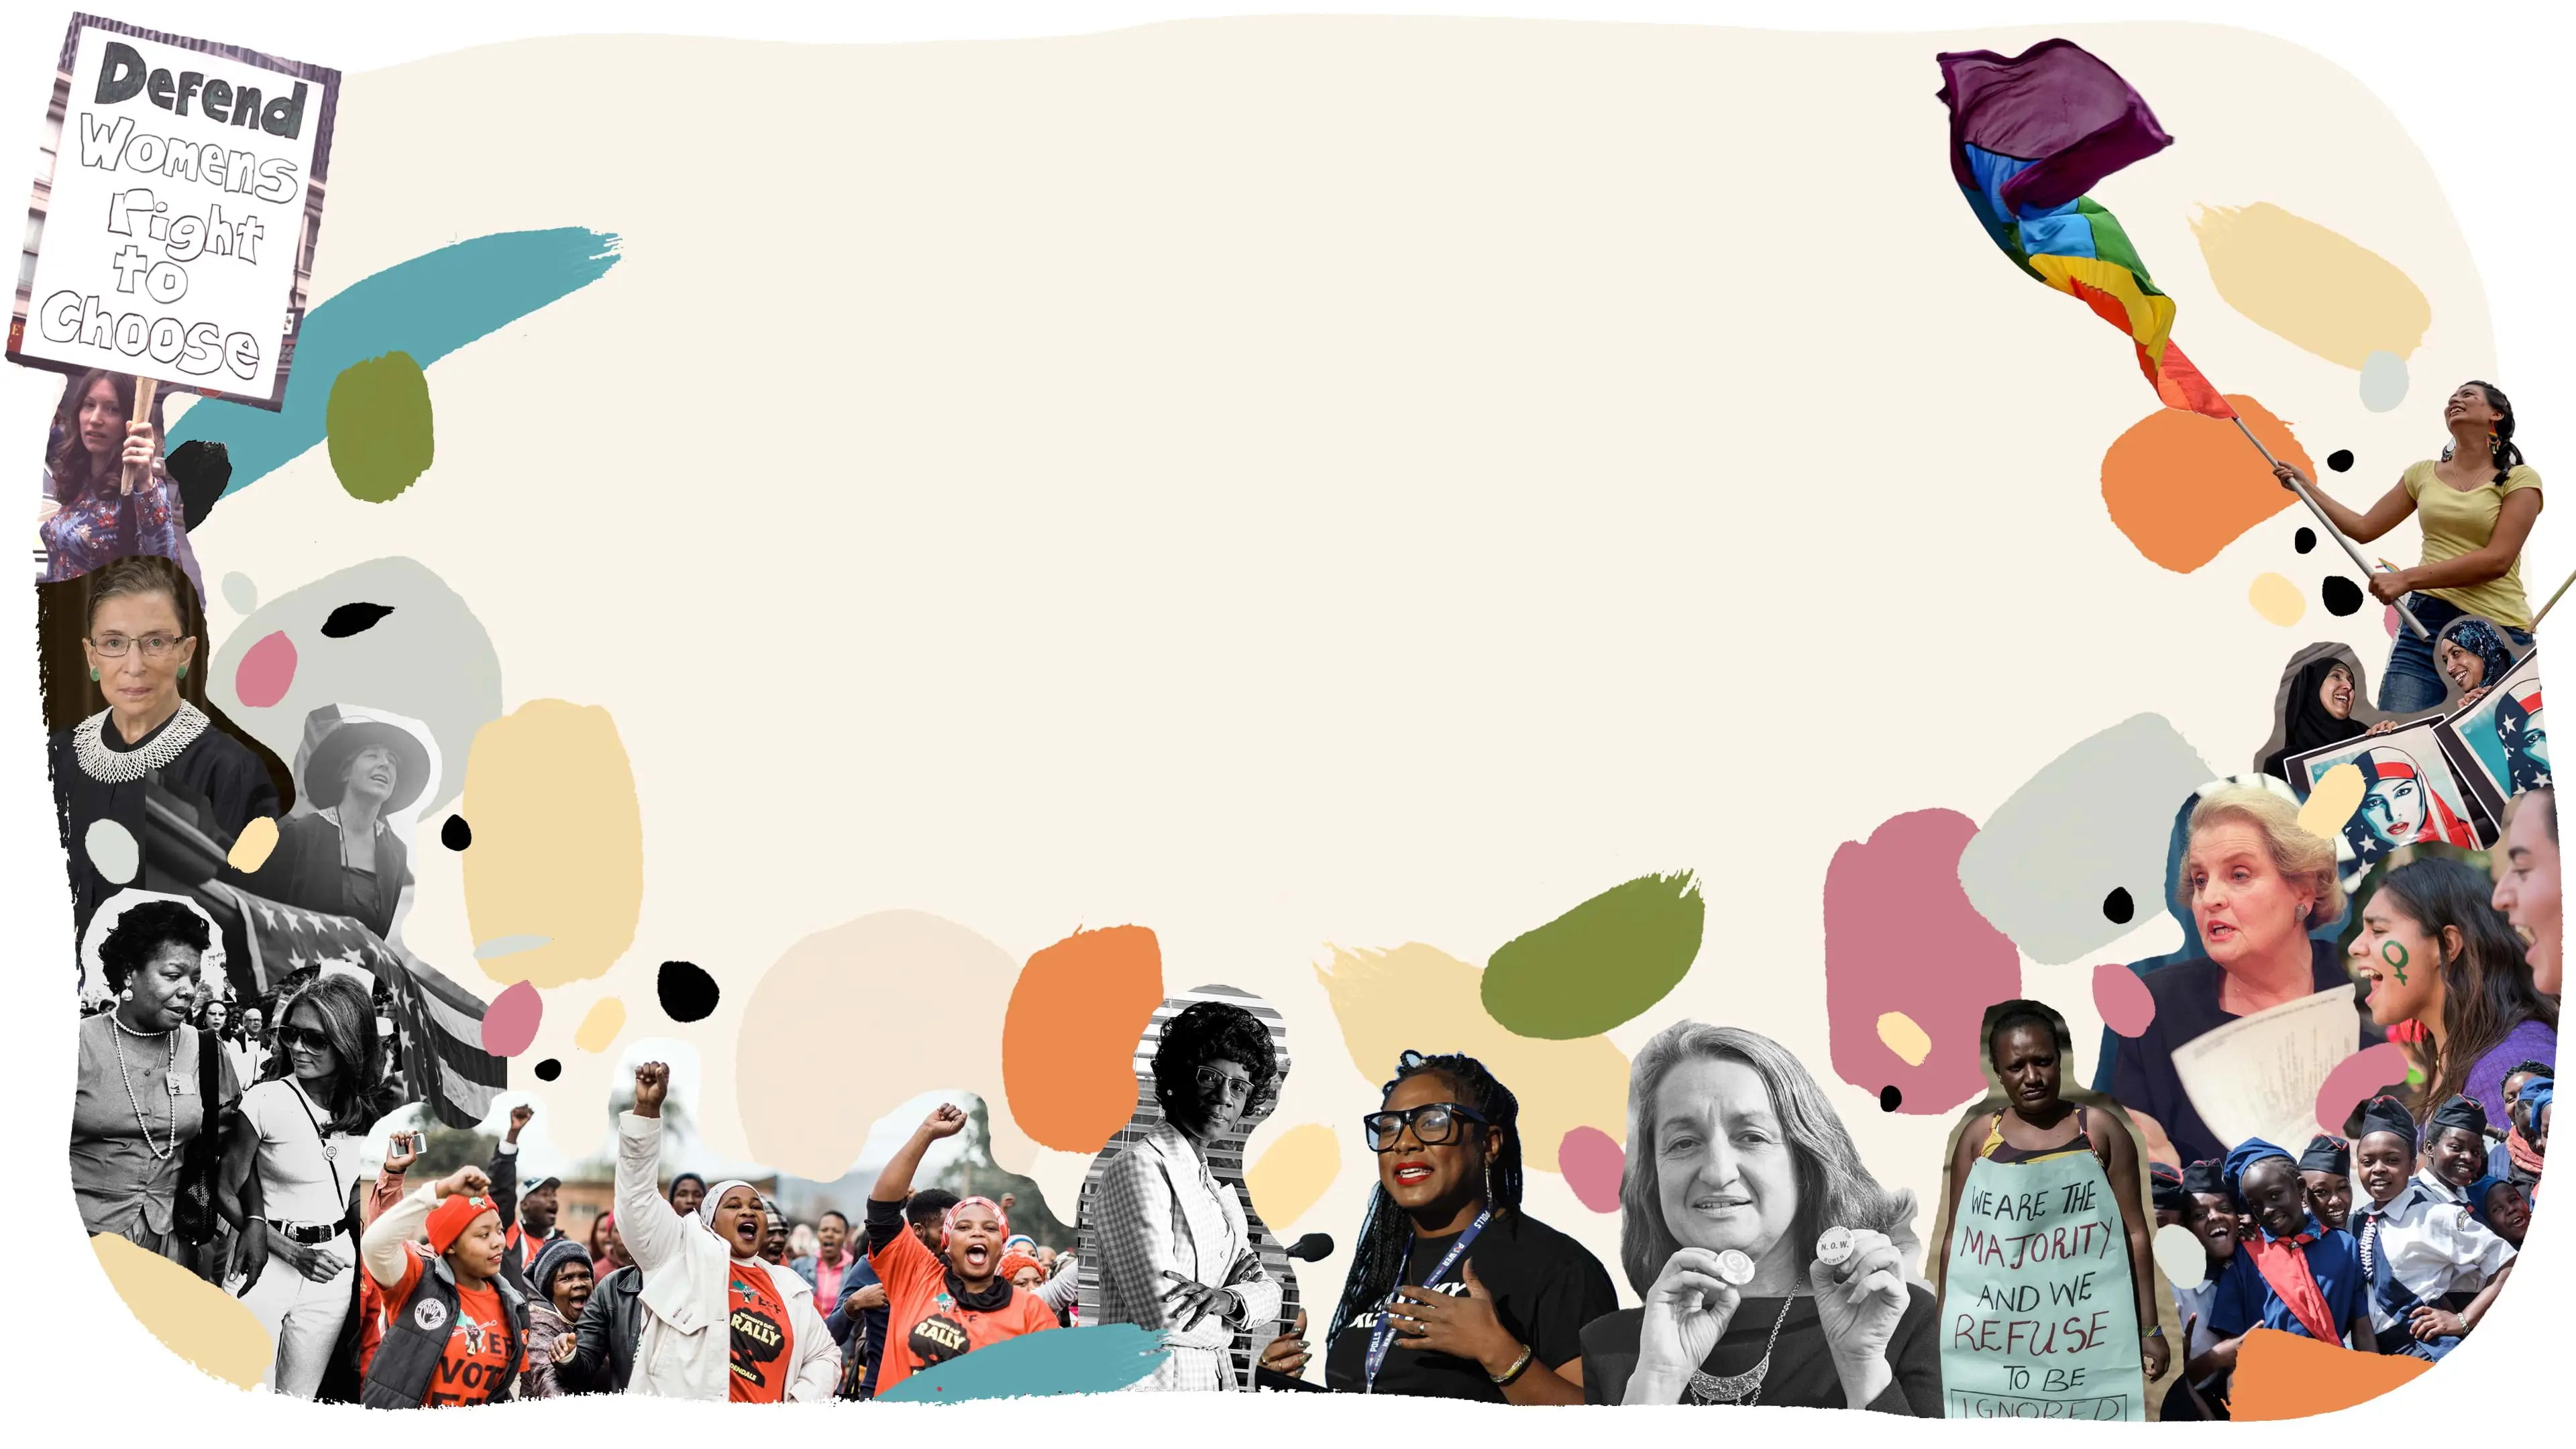 Collage of women in history and women protesting with colorful abstract shapes.